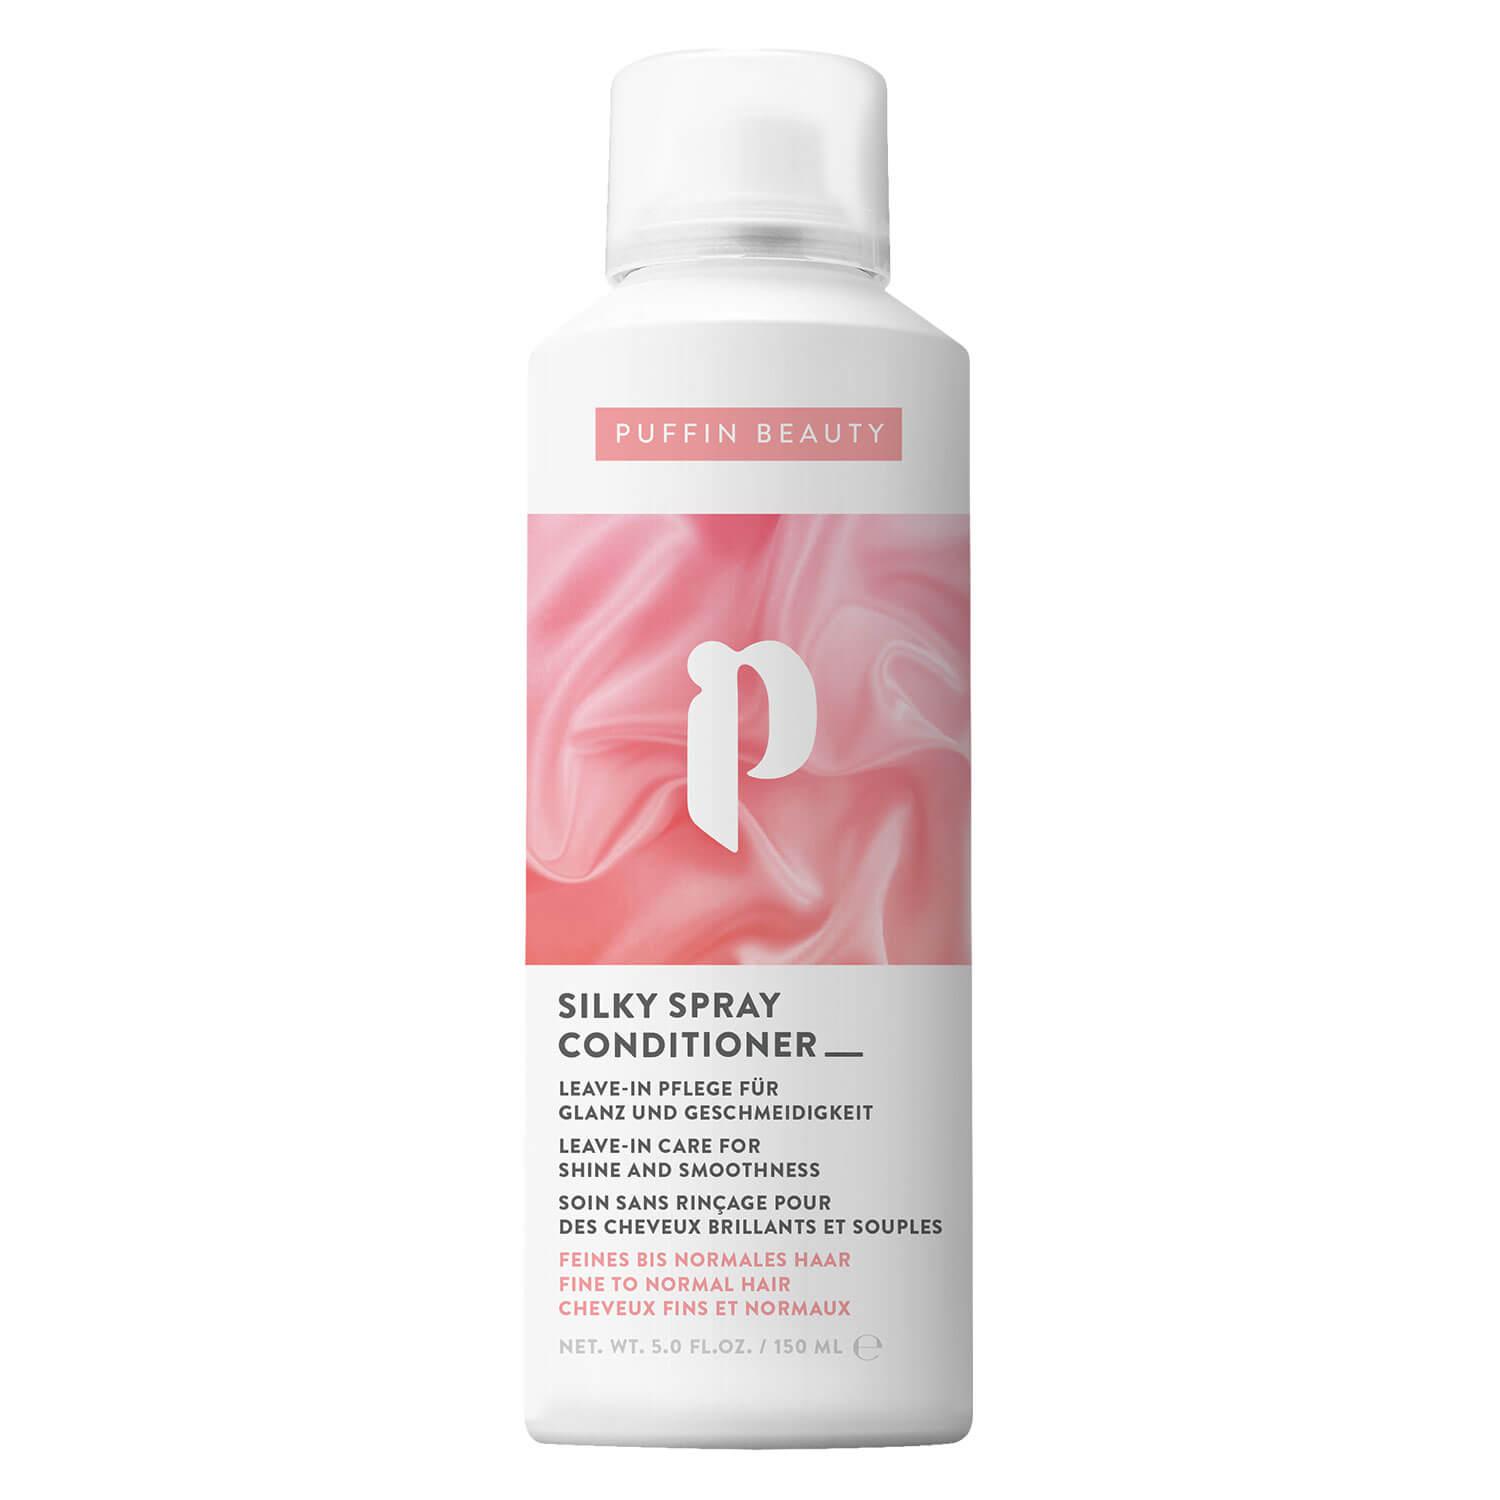 Puffin Beauty Care - Silky Spray Conditioner